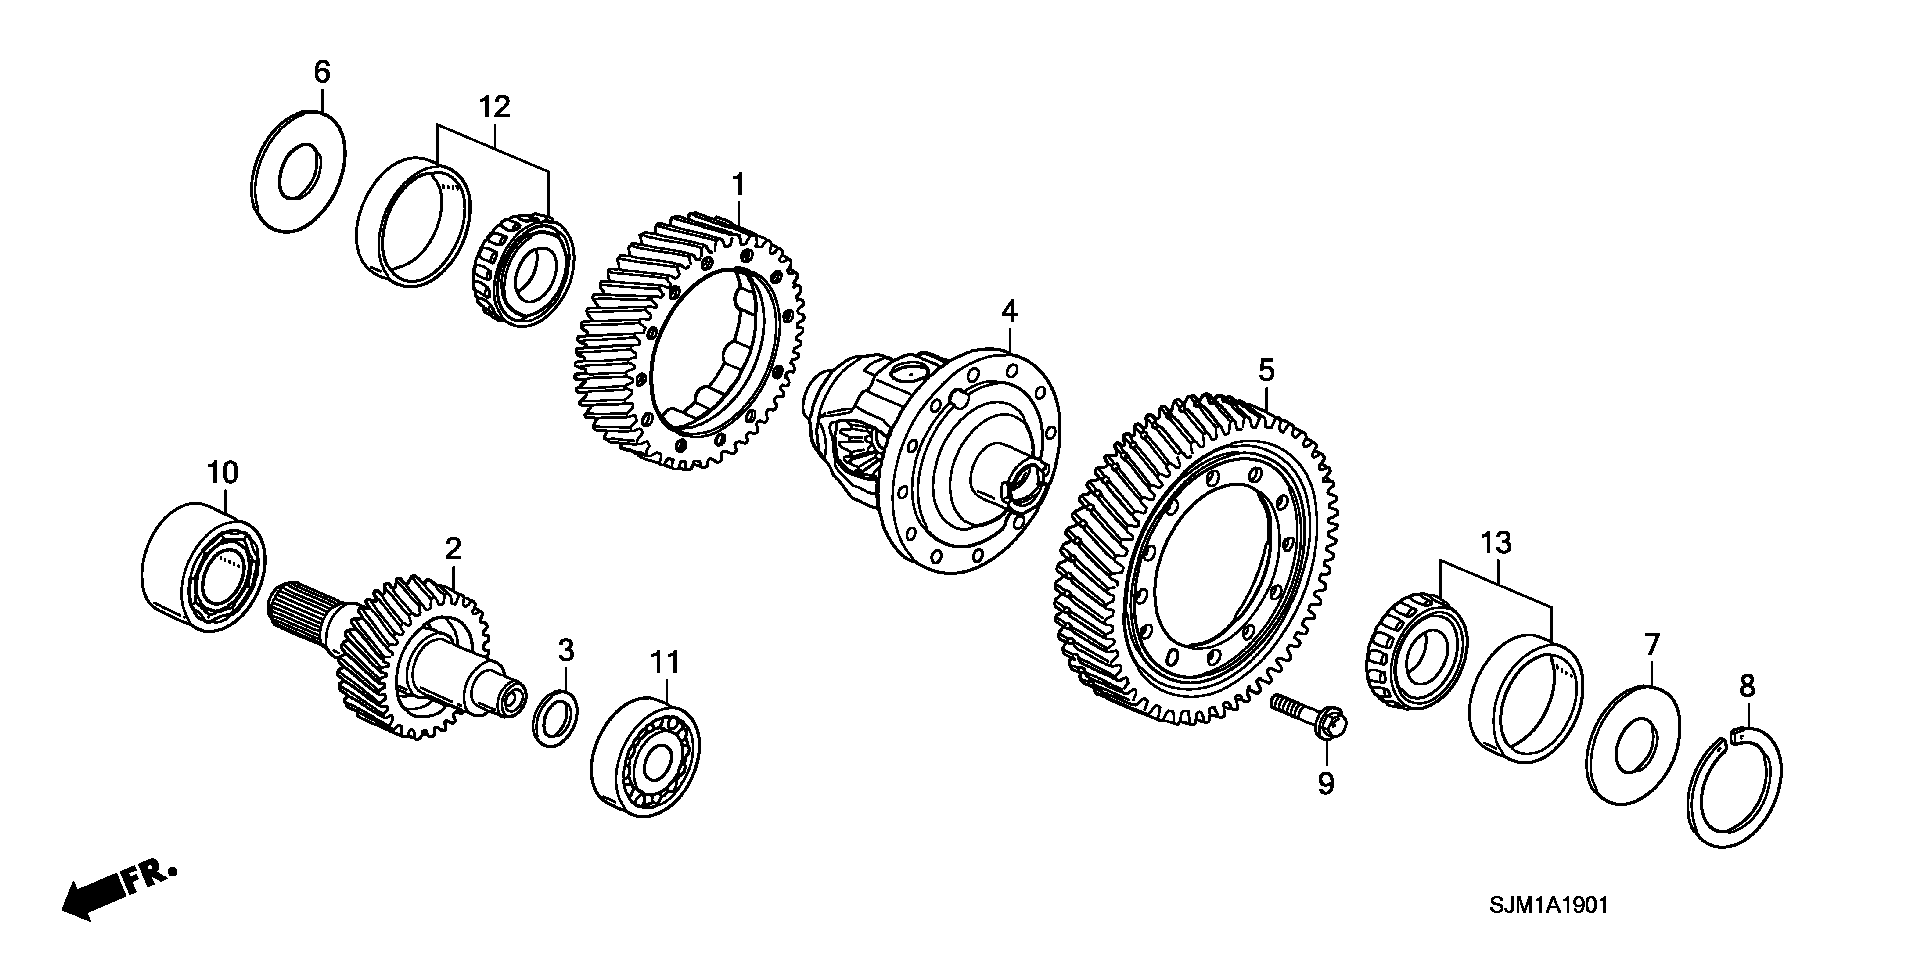 DIFFERENTIAL(4WD)(V6)